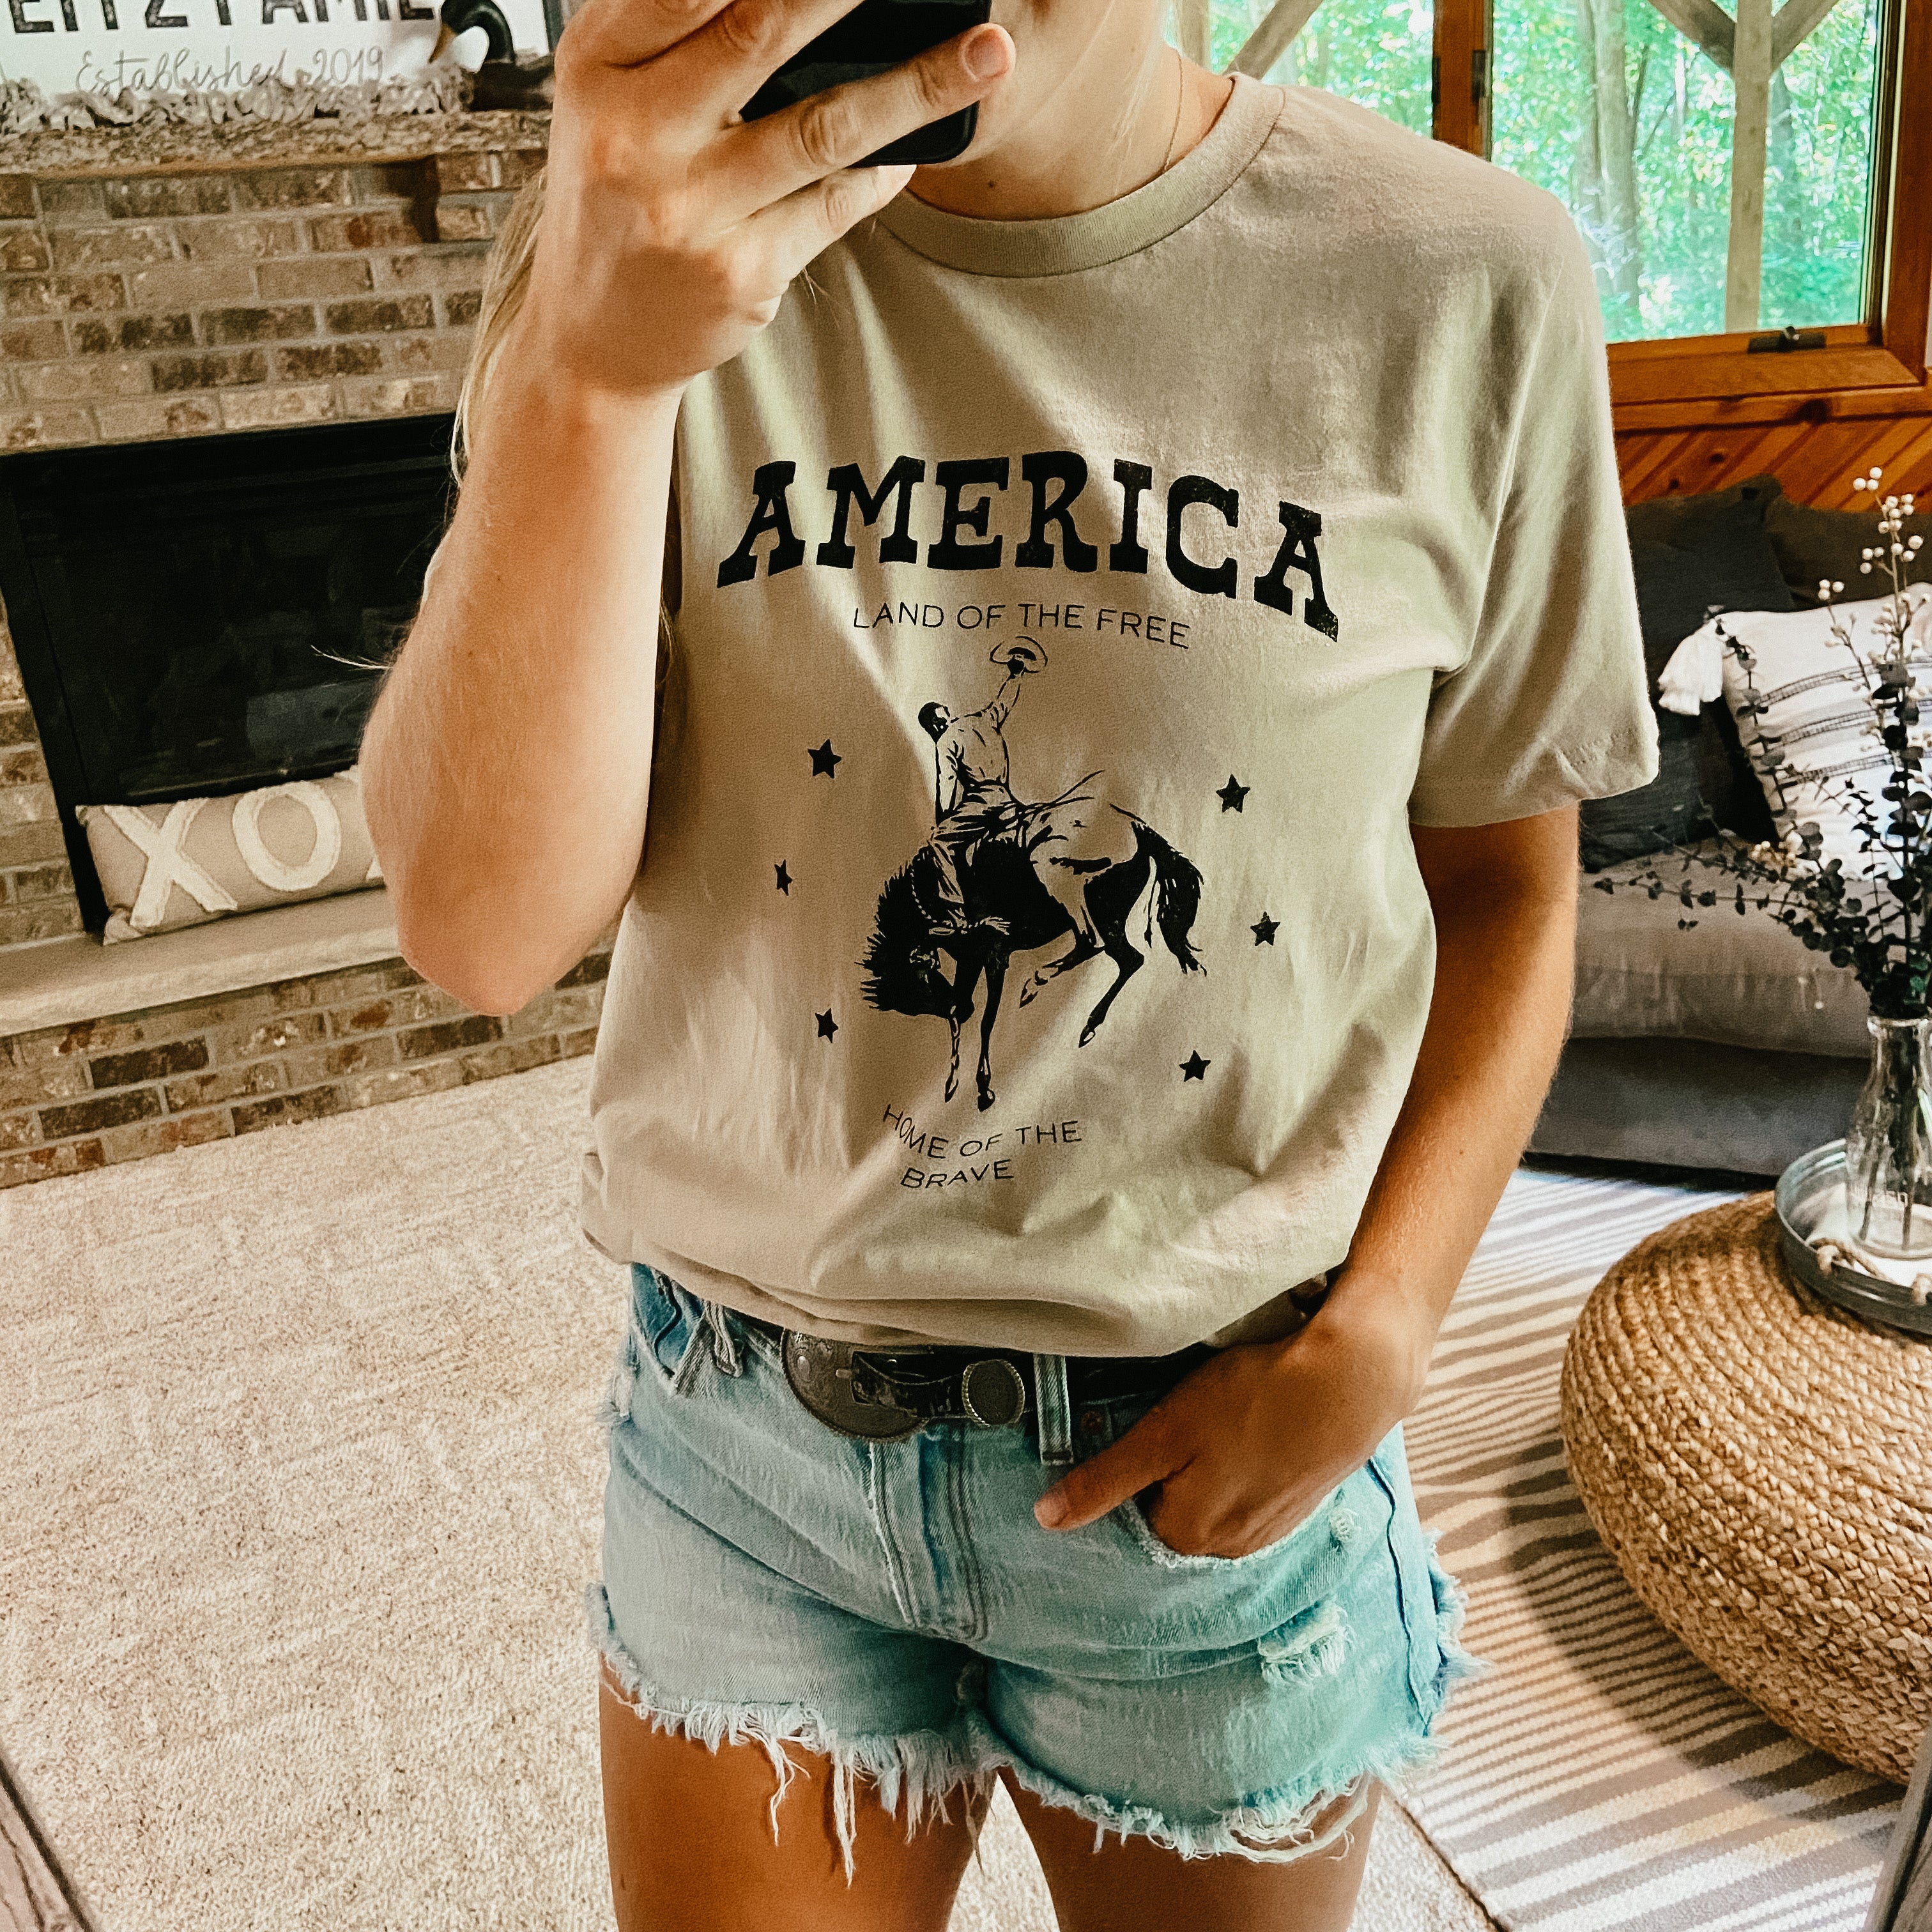 "America Land of The Free Home of The Brave" Graphic T-Shirt